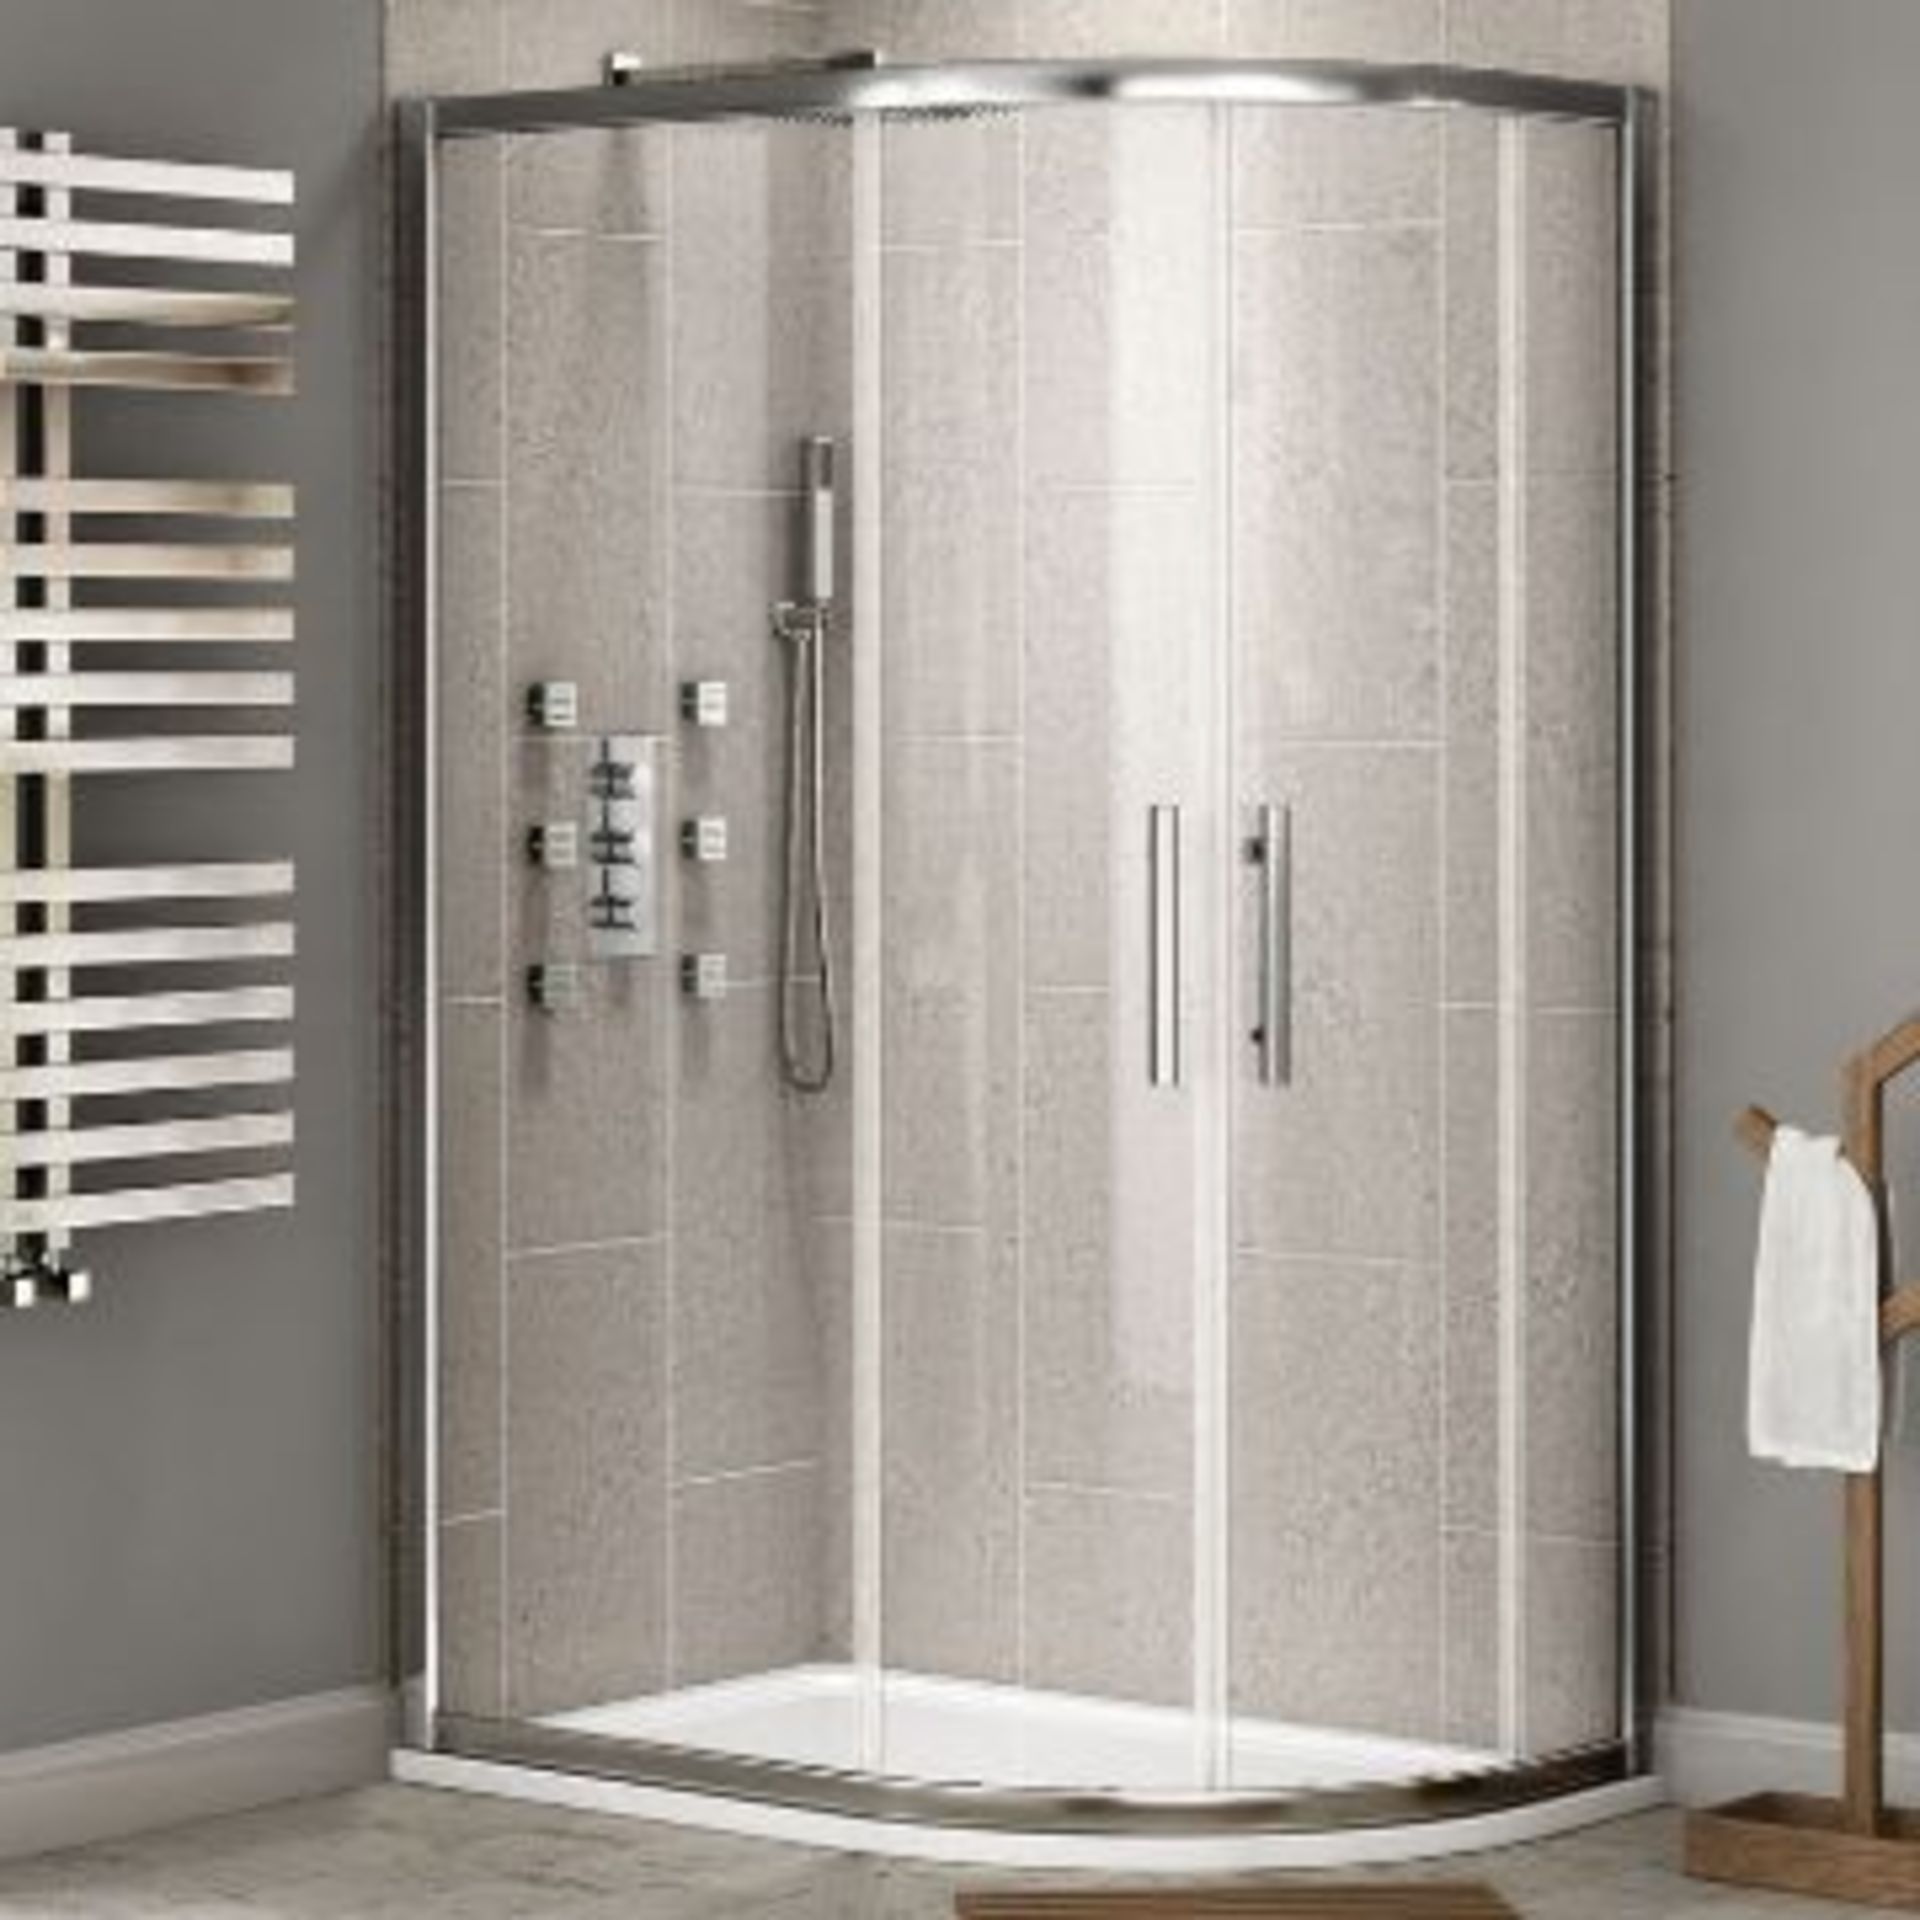 New Twyford's 900x800 mm - 8 mm - Premium Easy Clean Offset Quadrant Shower Enclosure - Reversible - Image 2 of 2